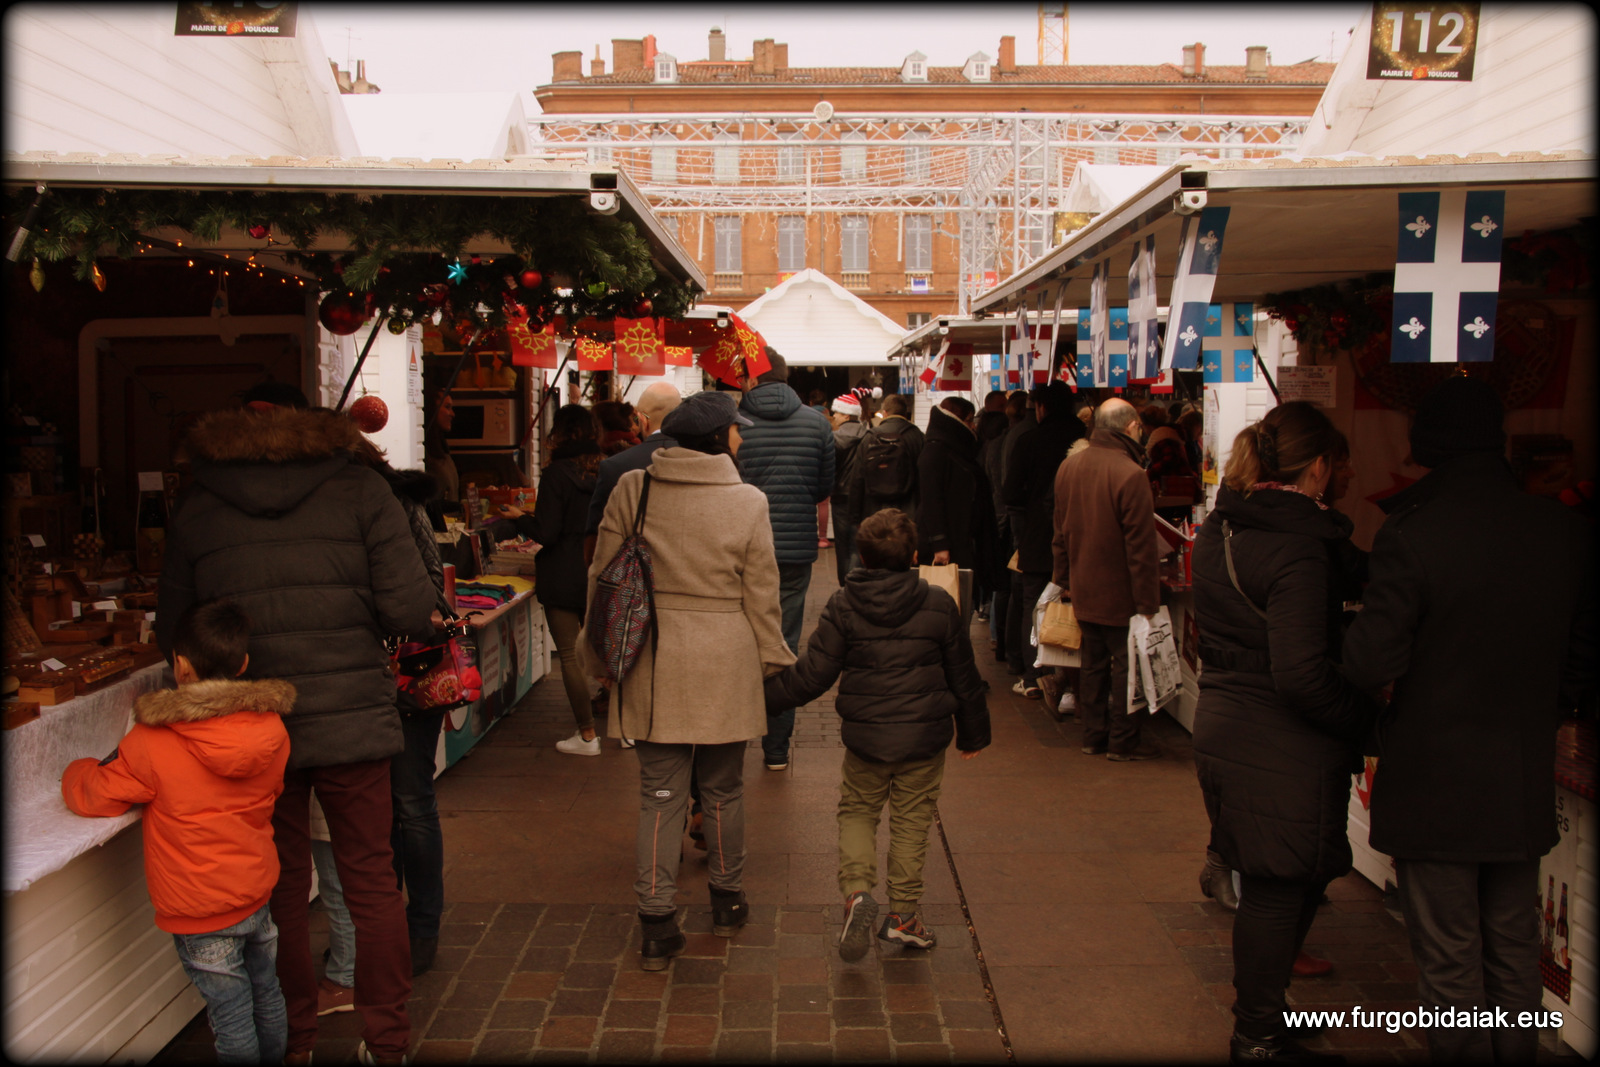 toulouse-127-001